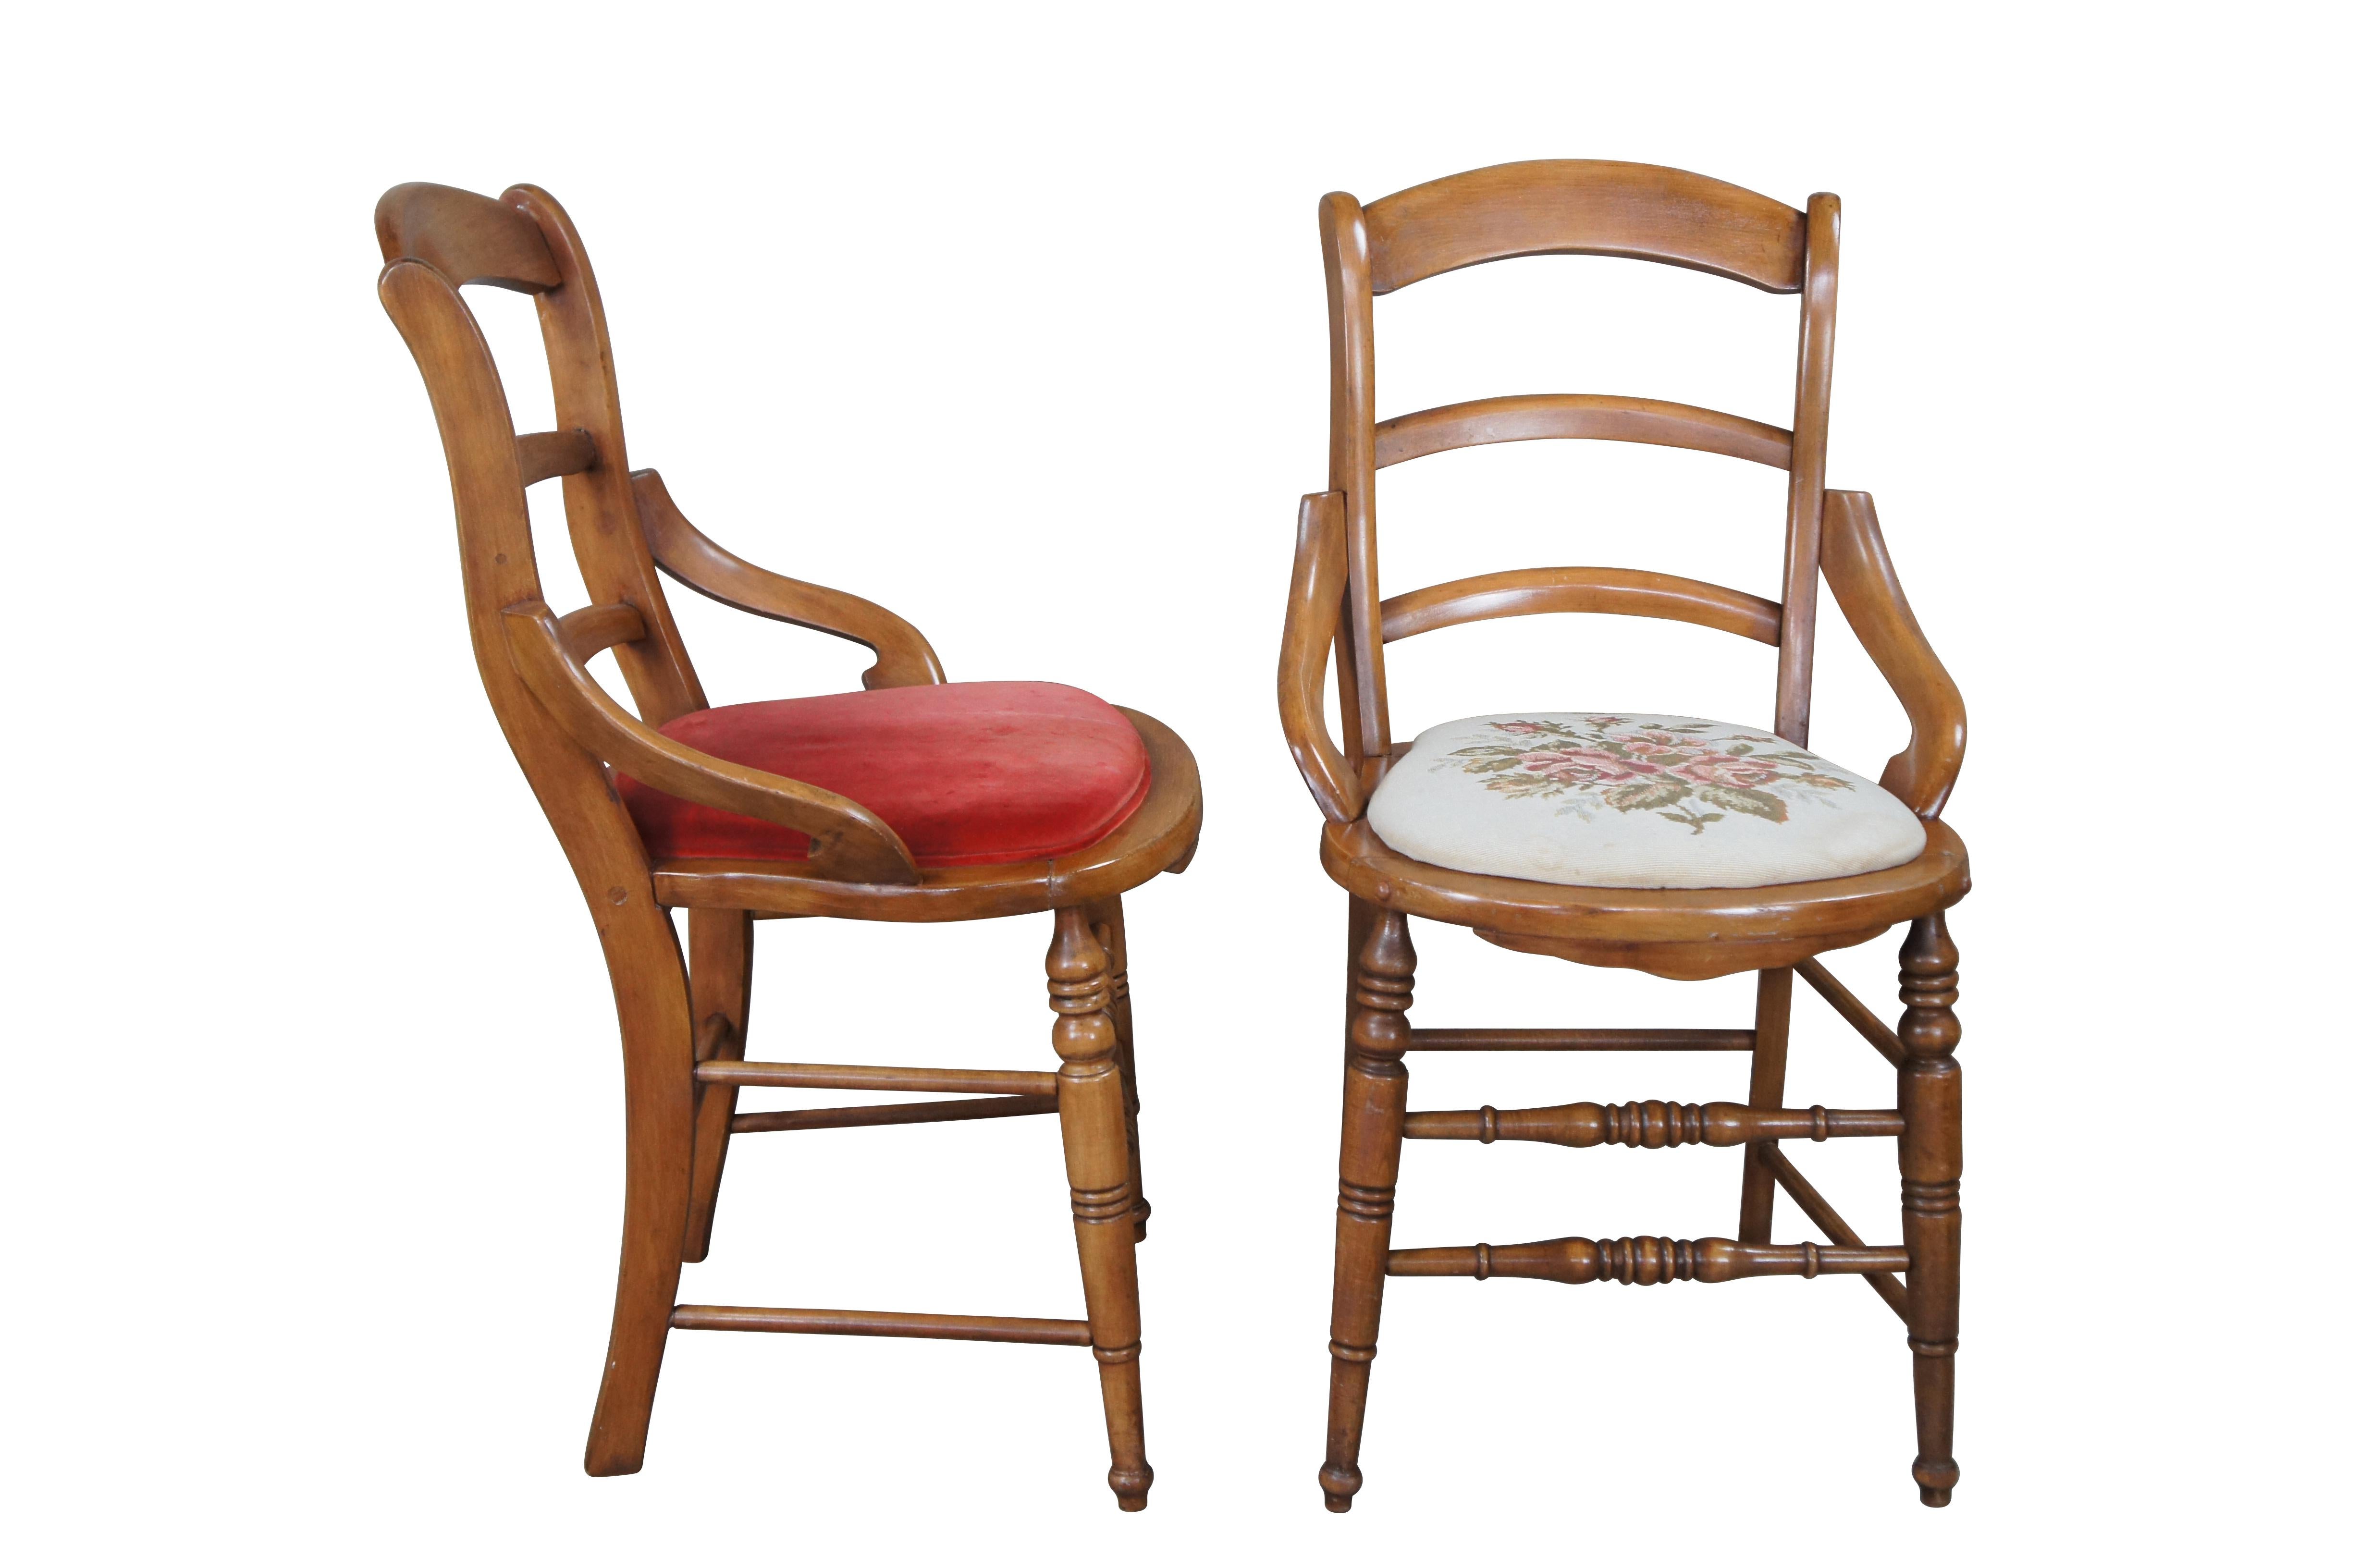 Two antique Victorian Eastlake parlor accent chairs. Made of maple featuring ladderback design with low arm, turned posts, and needlepoint / velvet seats. 

dimensions:
19